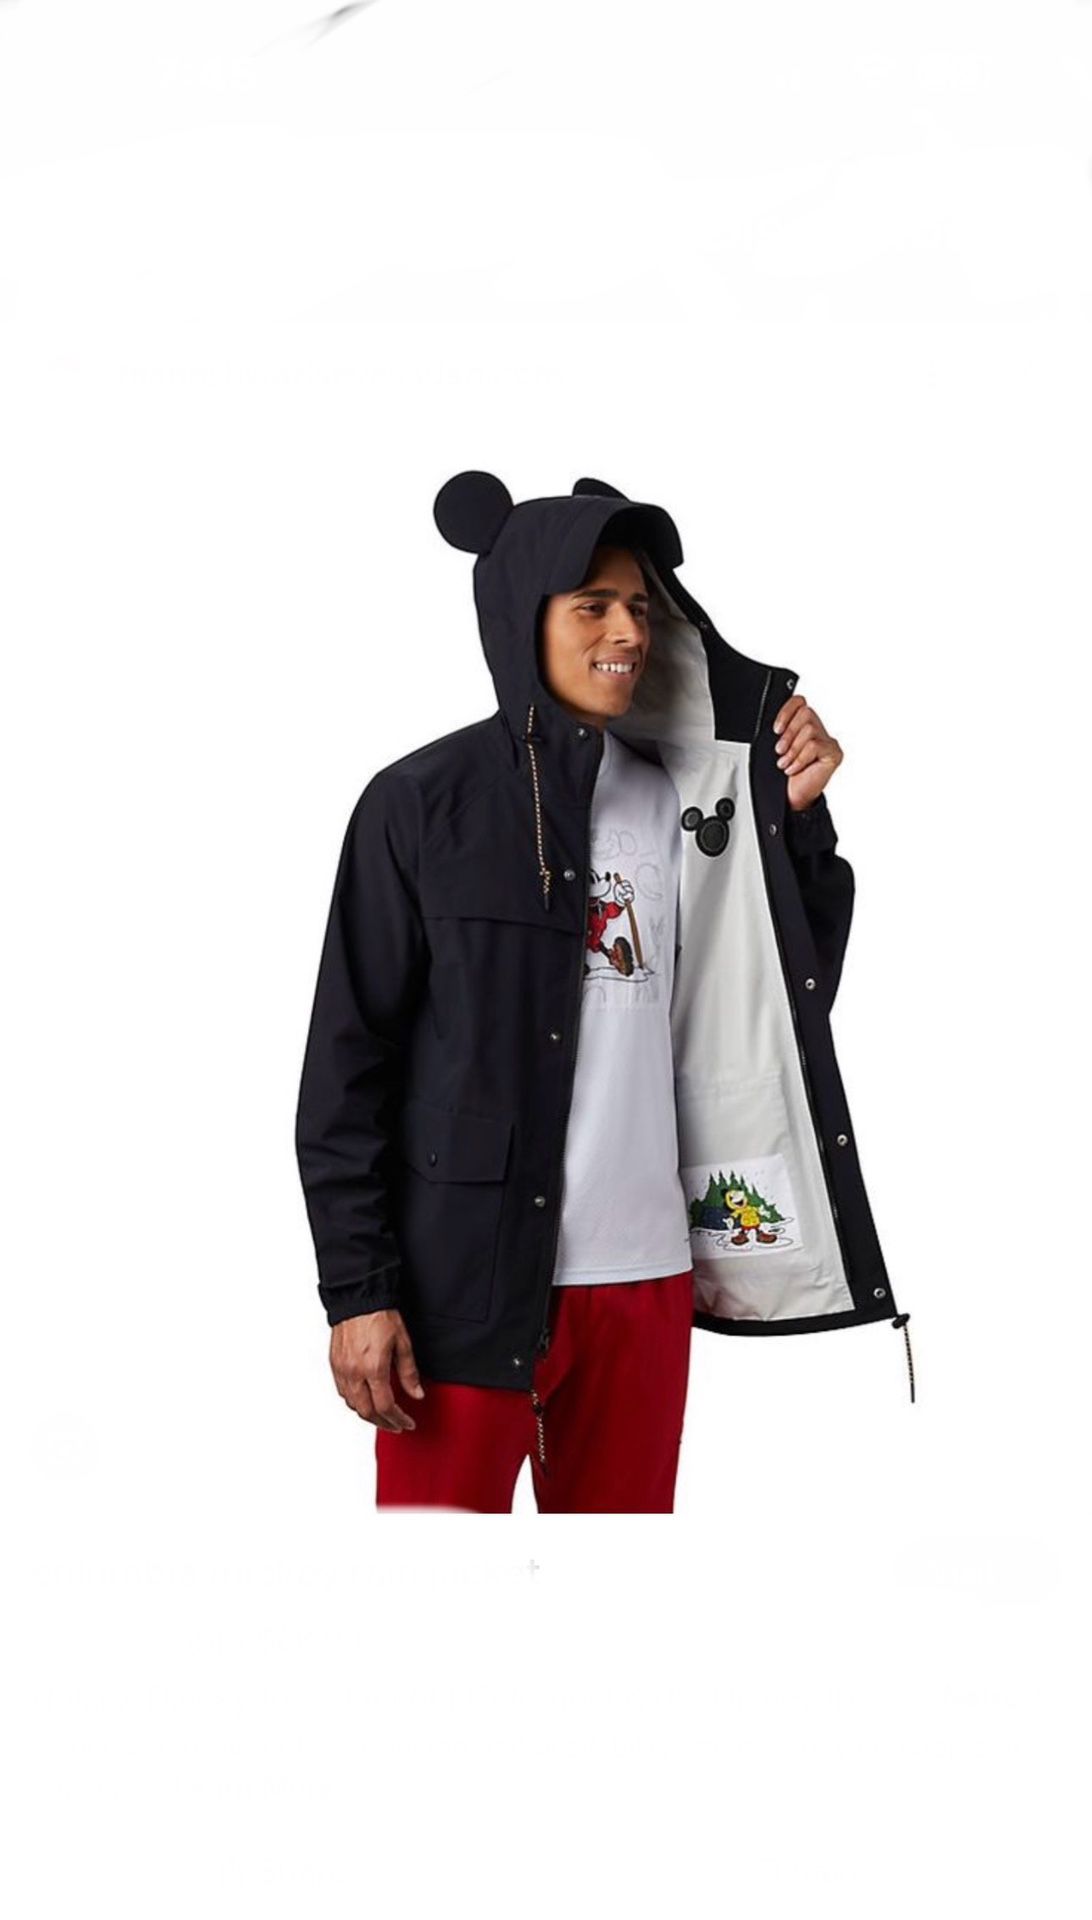 Columbia Unisex Adult Disney Ibex Rain Jacket, Black, Mickey Ears, Size Small, Full-Zip & Snap-Buttons, NWT, Great Gift 🎁 